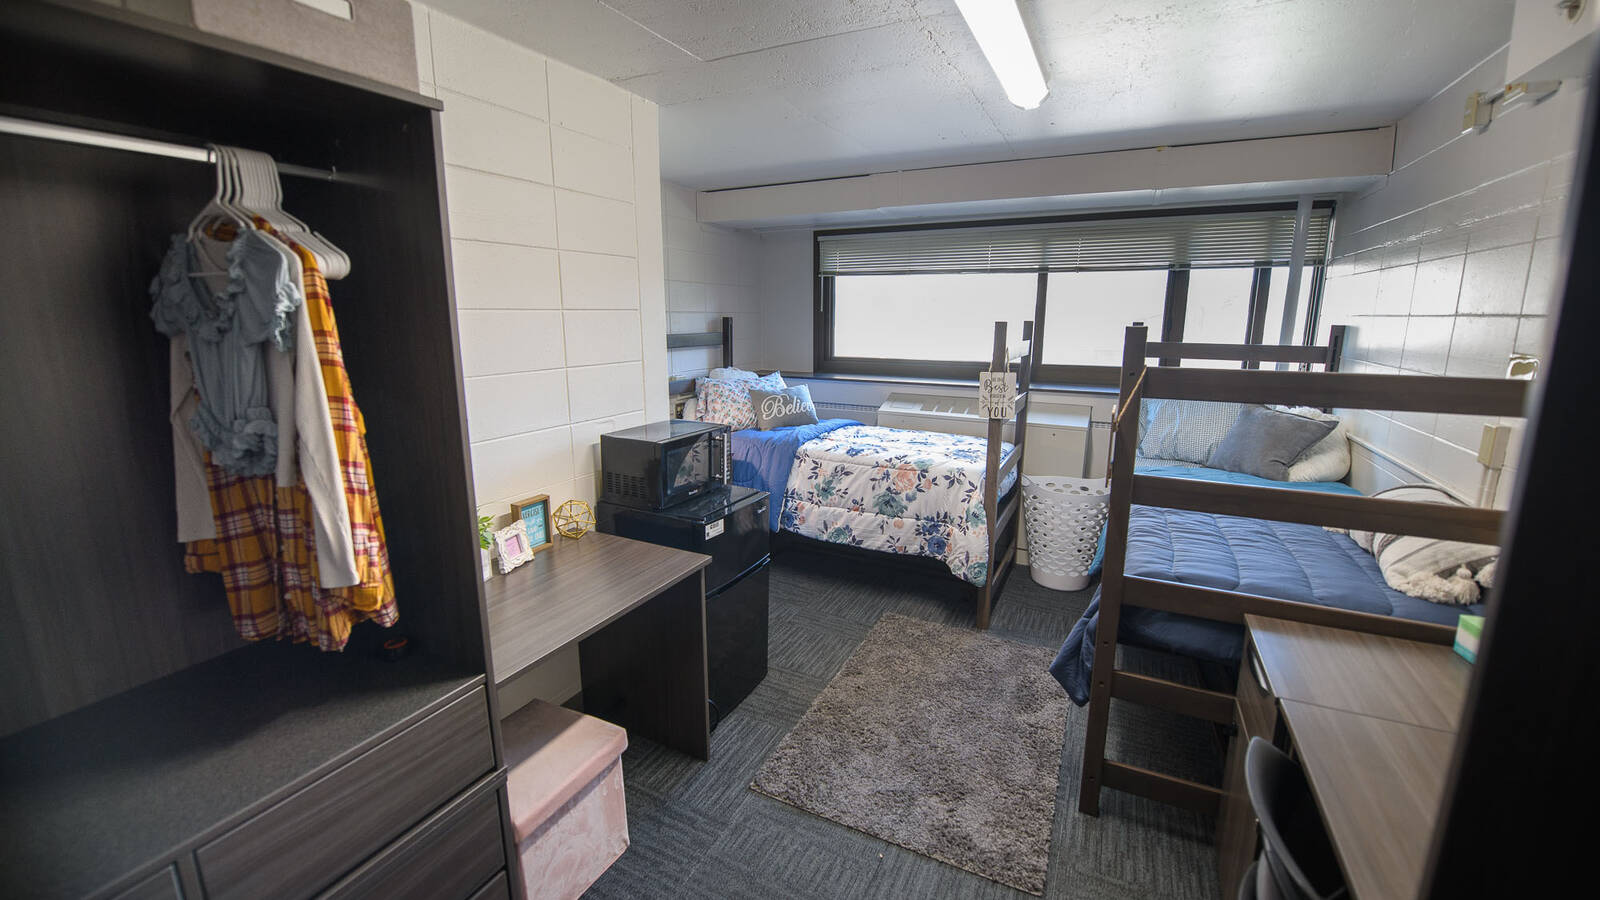 Double room in Towers Hall with two beds, desks, chairs, a mini fridge, closet spaces, and a big window.